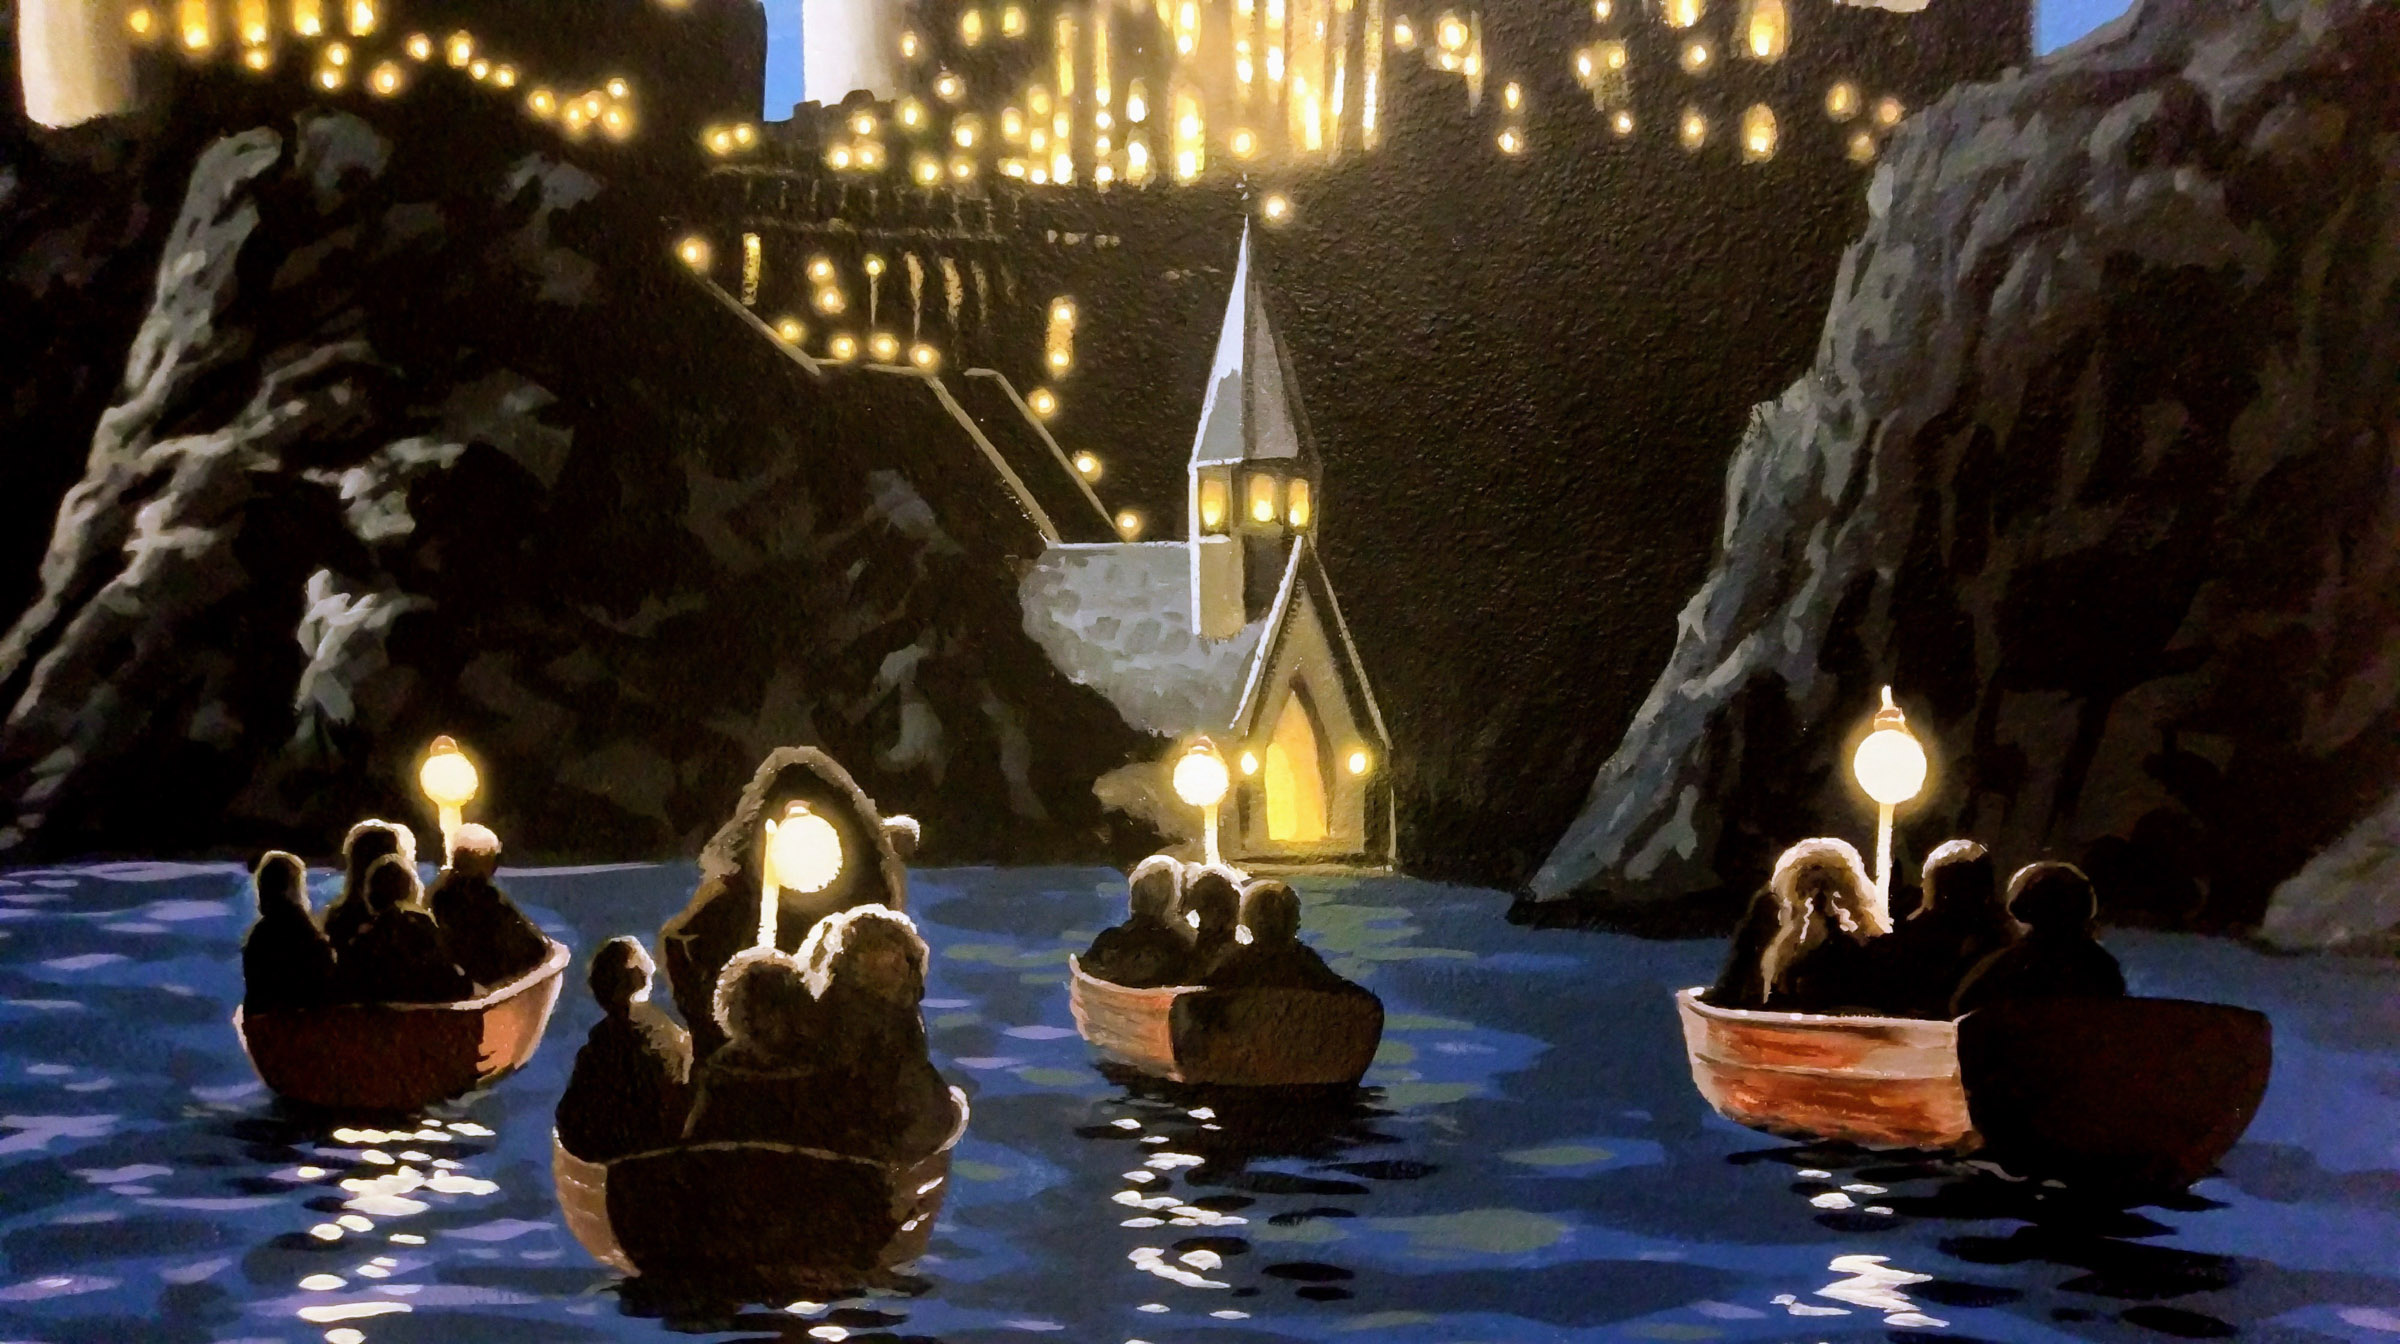 Harry Potter mural of Hogwarts and the first years with Hagrid boating across the lake